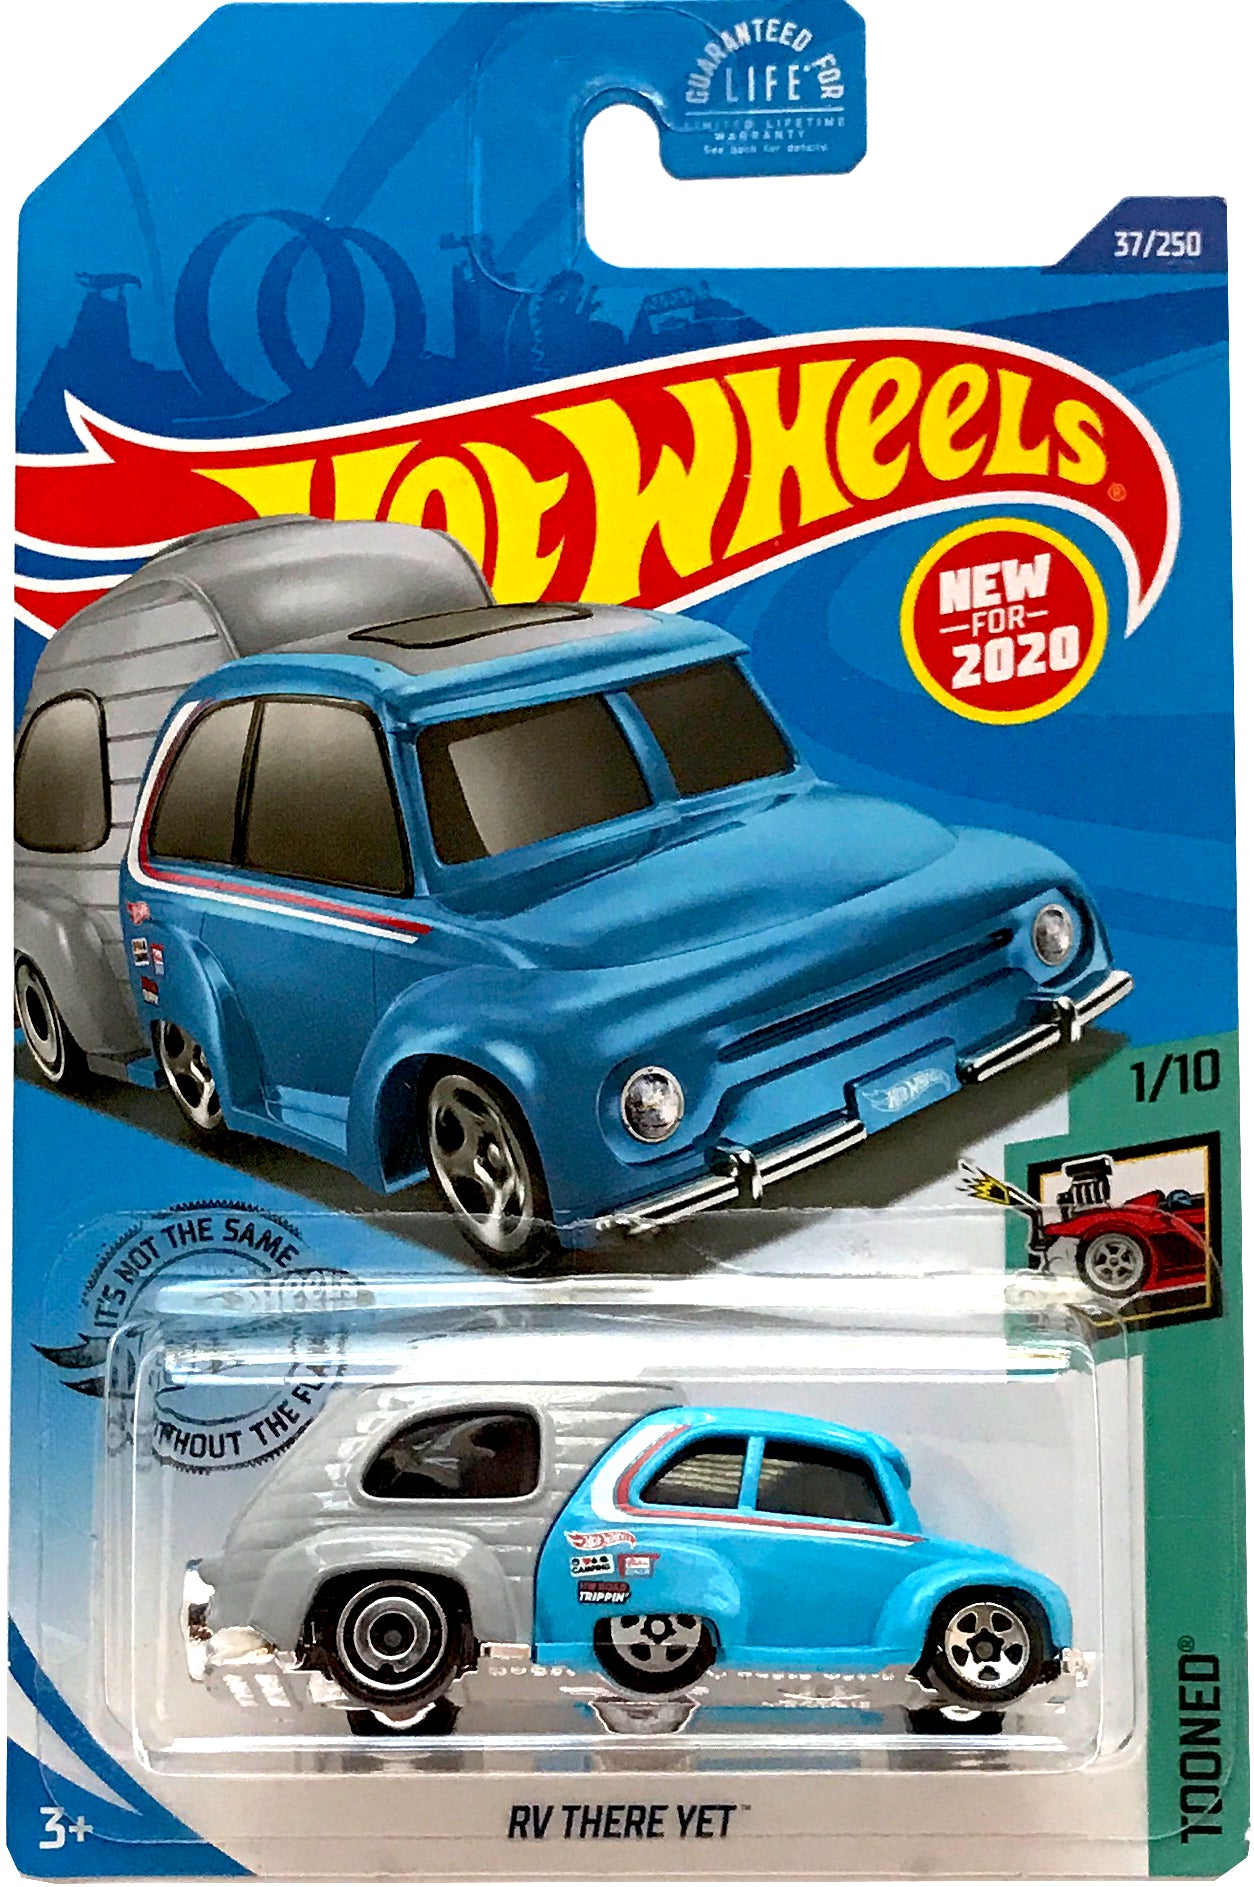 2020 Hot Wheels Mainline #037 - RV There Yet (Blue Grey) GHF85